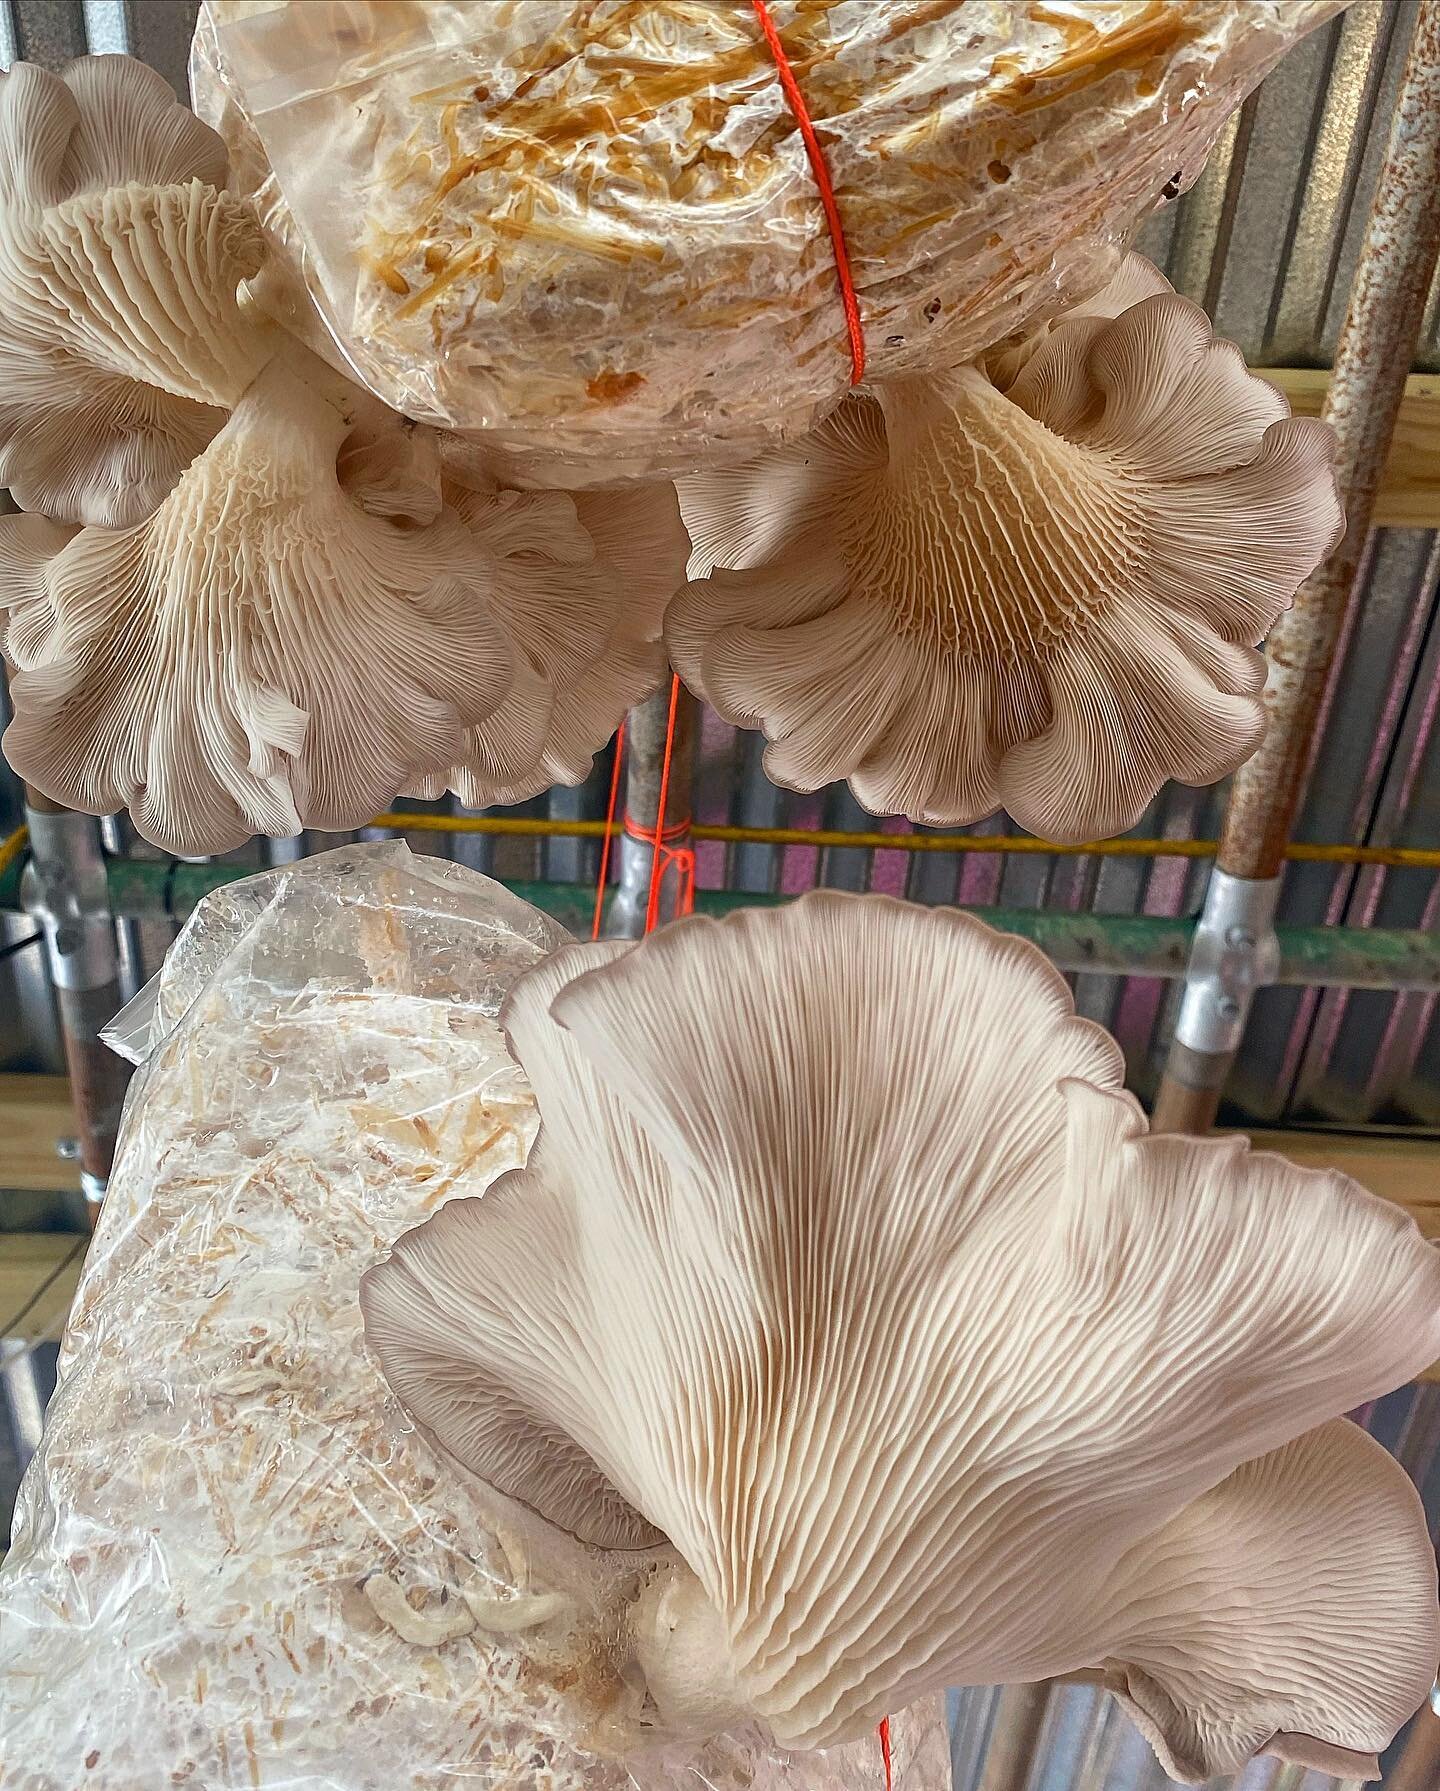 🍄WORKSHOP EXPERIENCE🍄

Have you ever considered growing your own mushrooms? Or wanted to have an abundance of mushrooms for your culinary delights? 

During this years 🍃Earth Day Festival🍃you&rsquo;ll have the opportunity to learn! 

🍄🍄🍄

🍄Co